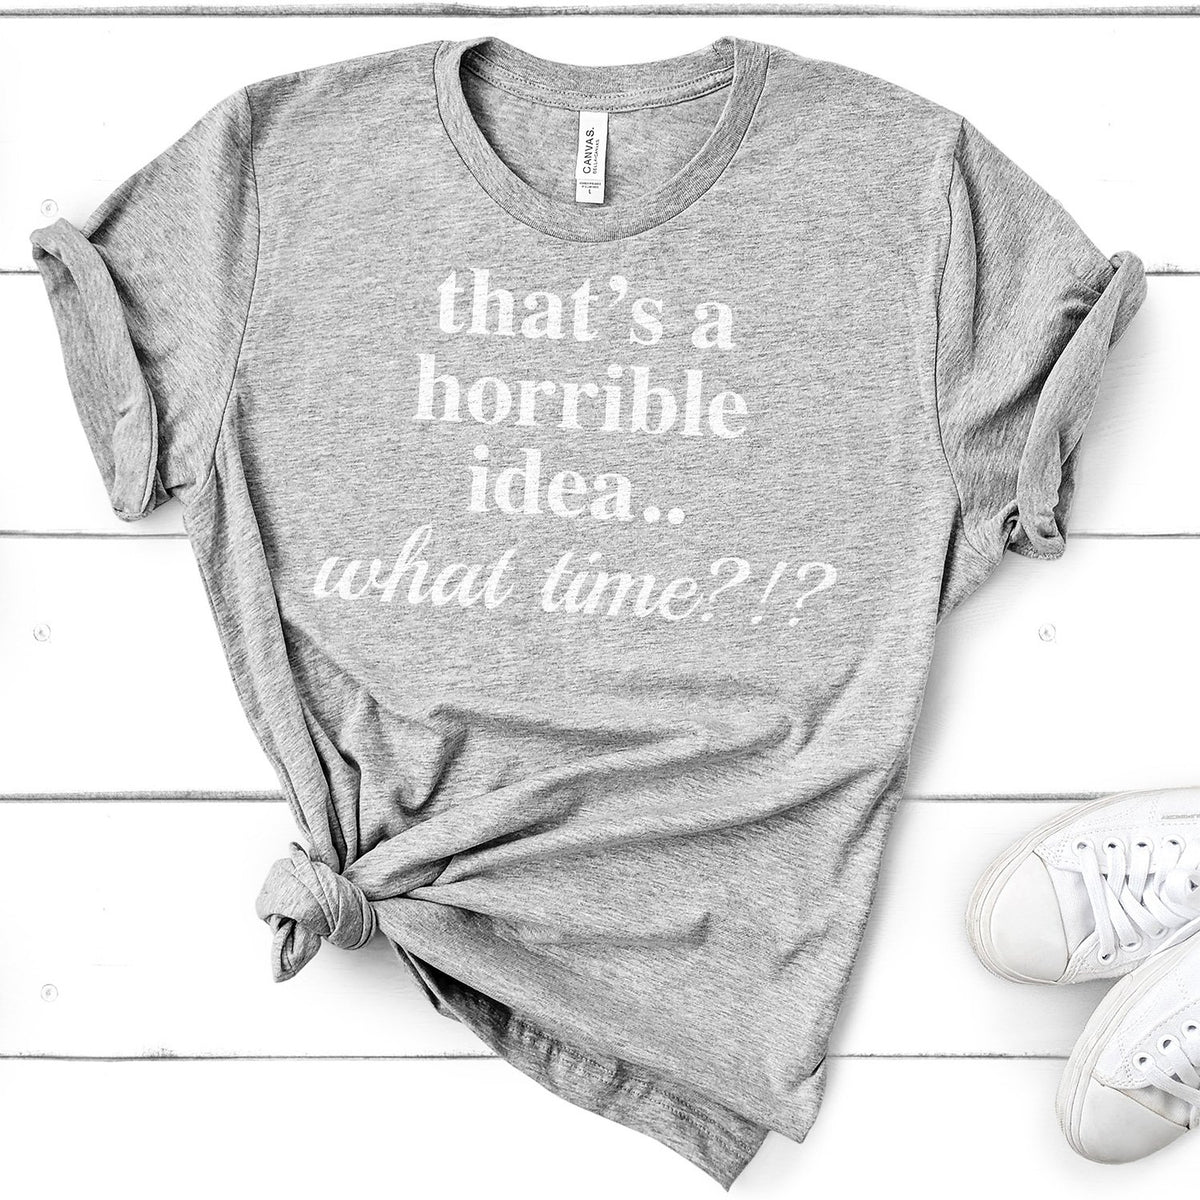 That&#39;s A Horrible Idea.. What Time? - Short Sleeve Tee Shirt